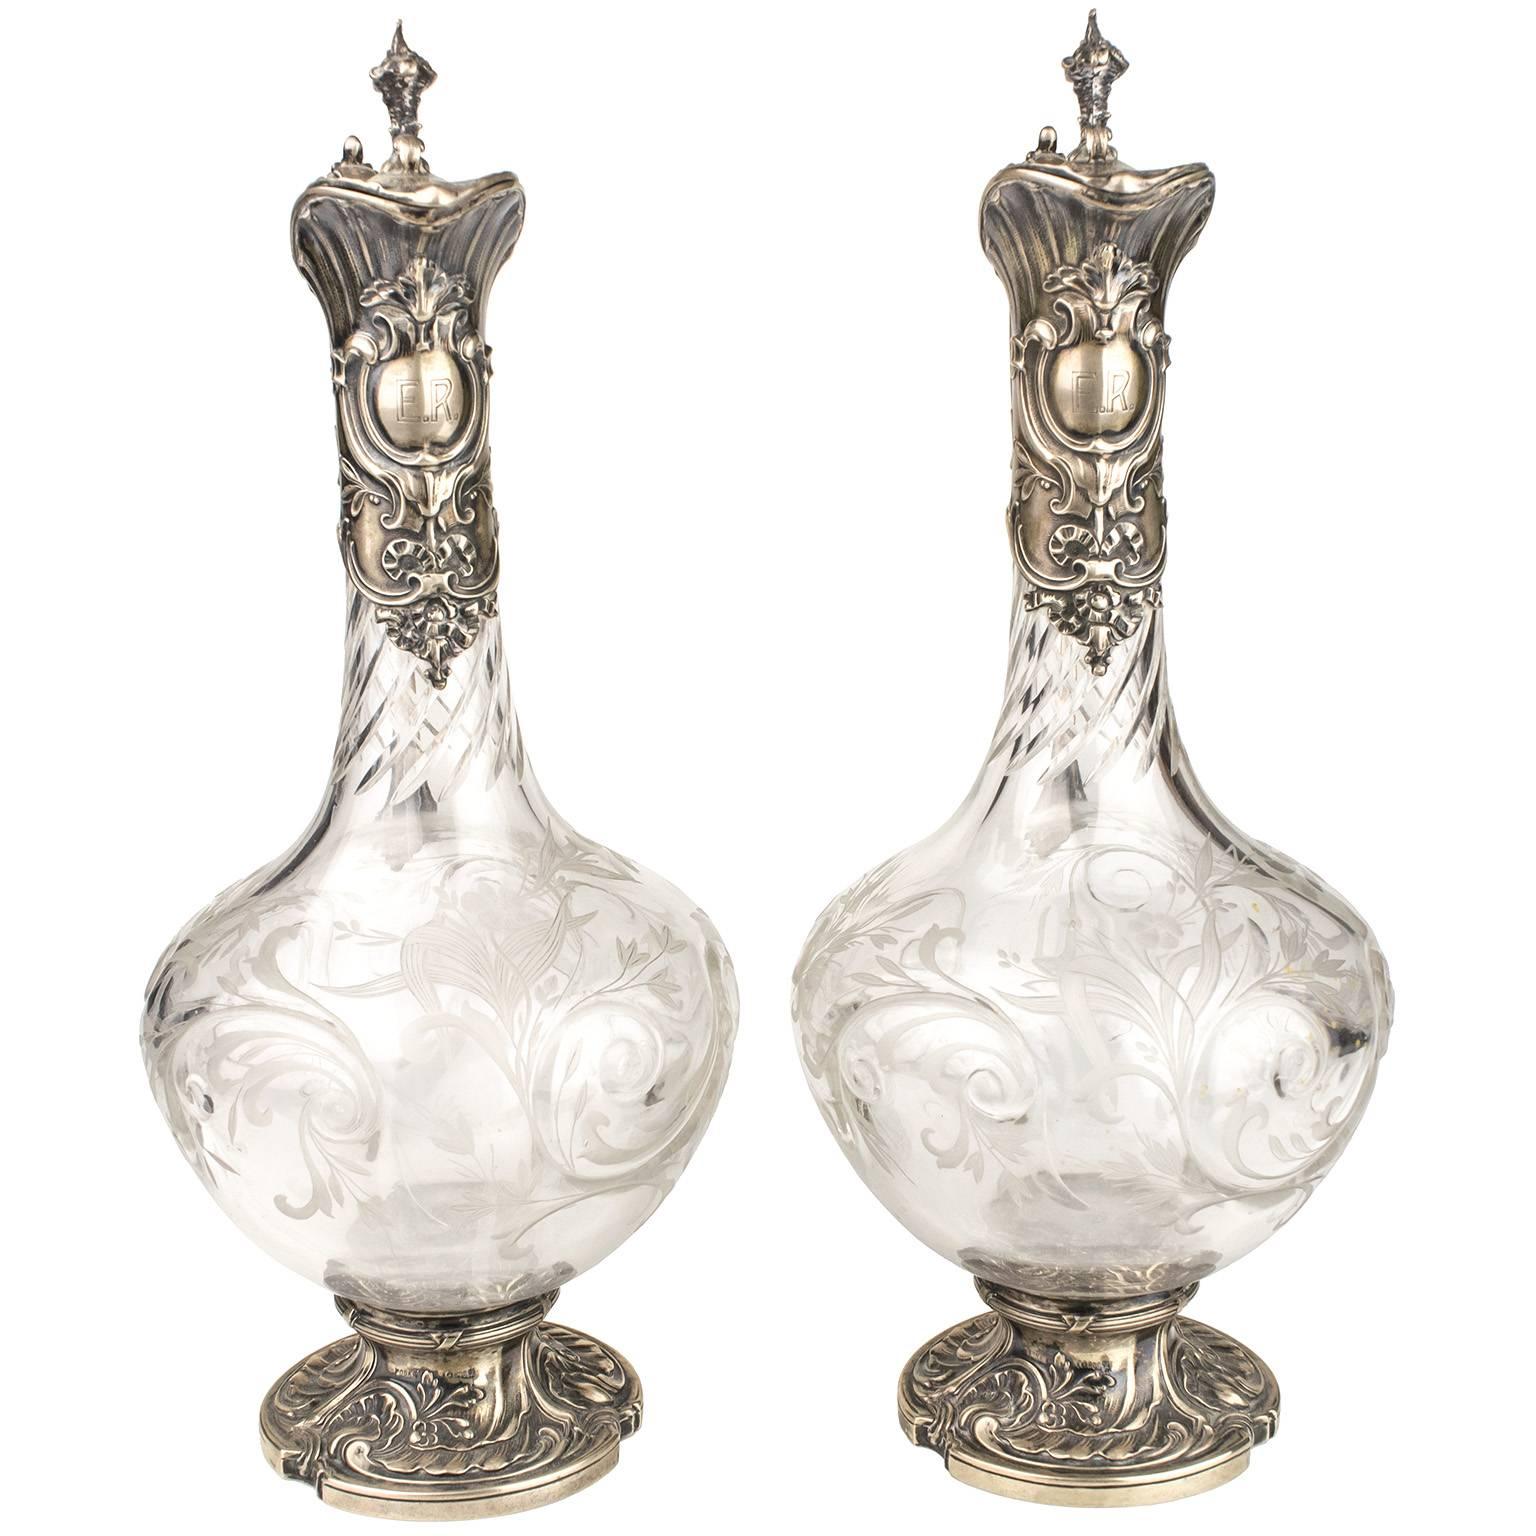 Pair of German silver and glass jugs from the early 20th century retailed by L. Posen Witwe. It shows the manufacturer’s mark of P. Bruckmann & Söhne of Heilbronn